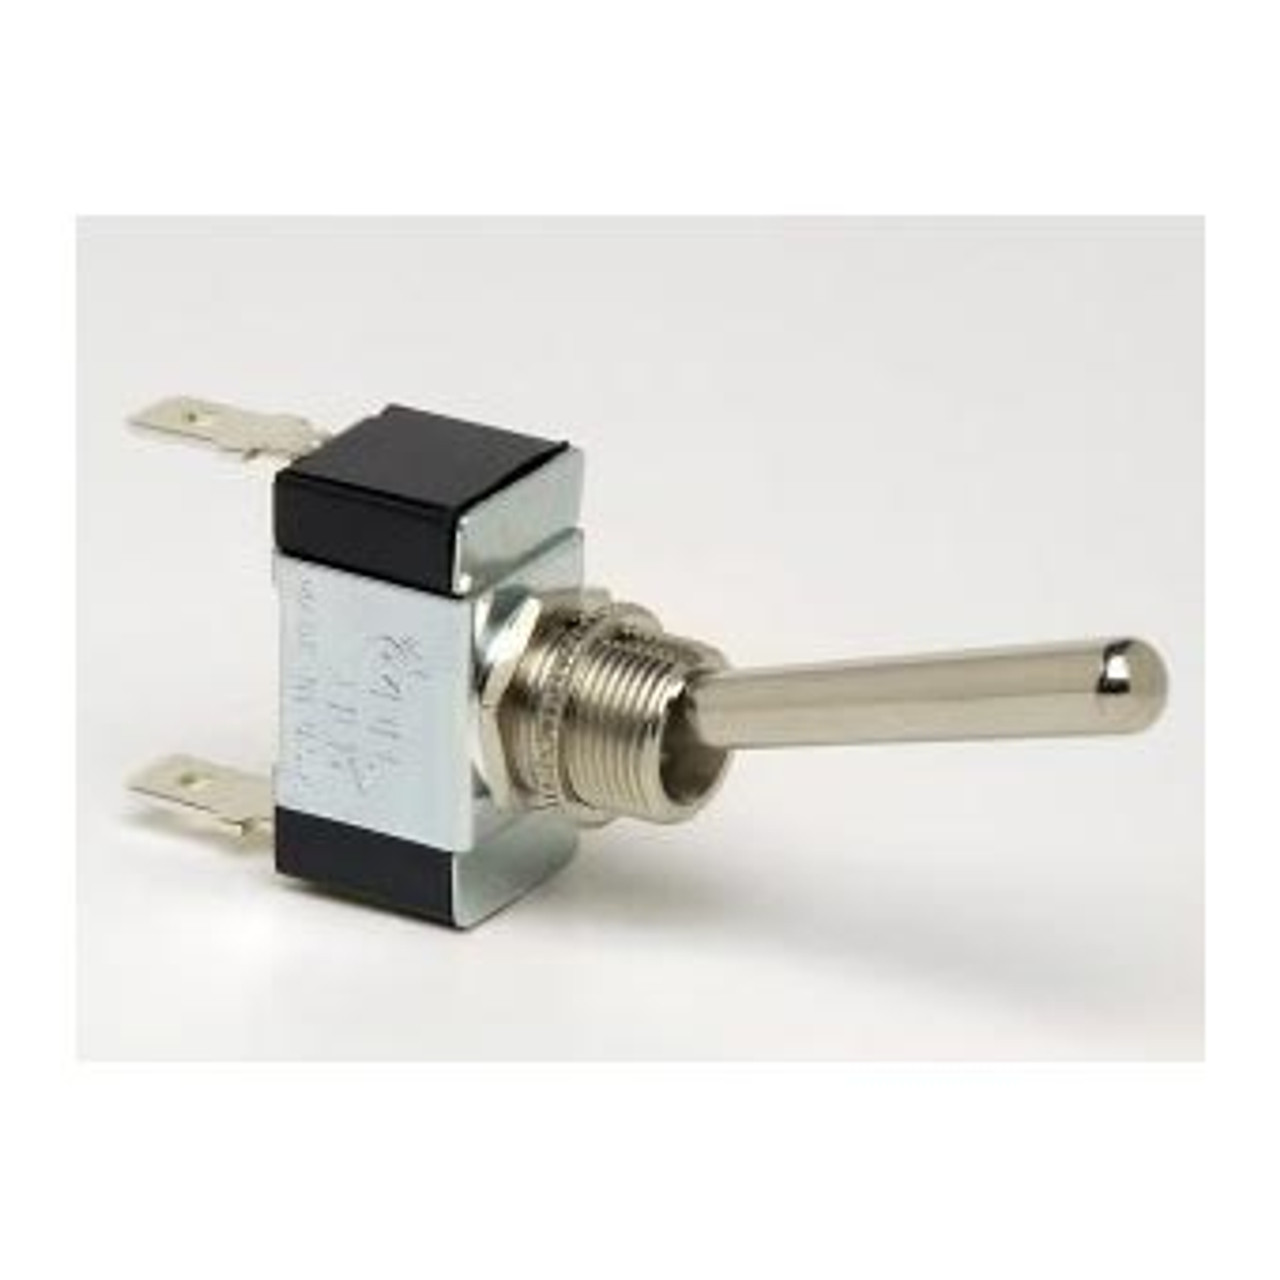 TOGGLE SWITCH ON-OFF SPST 2 BLADE TERMINALS LONG HANDLE